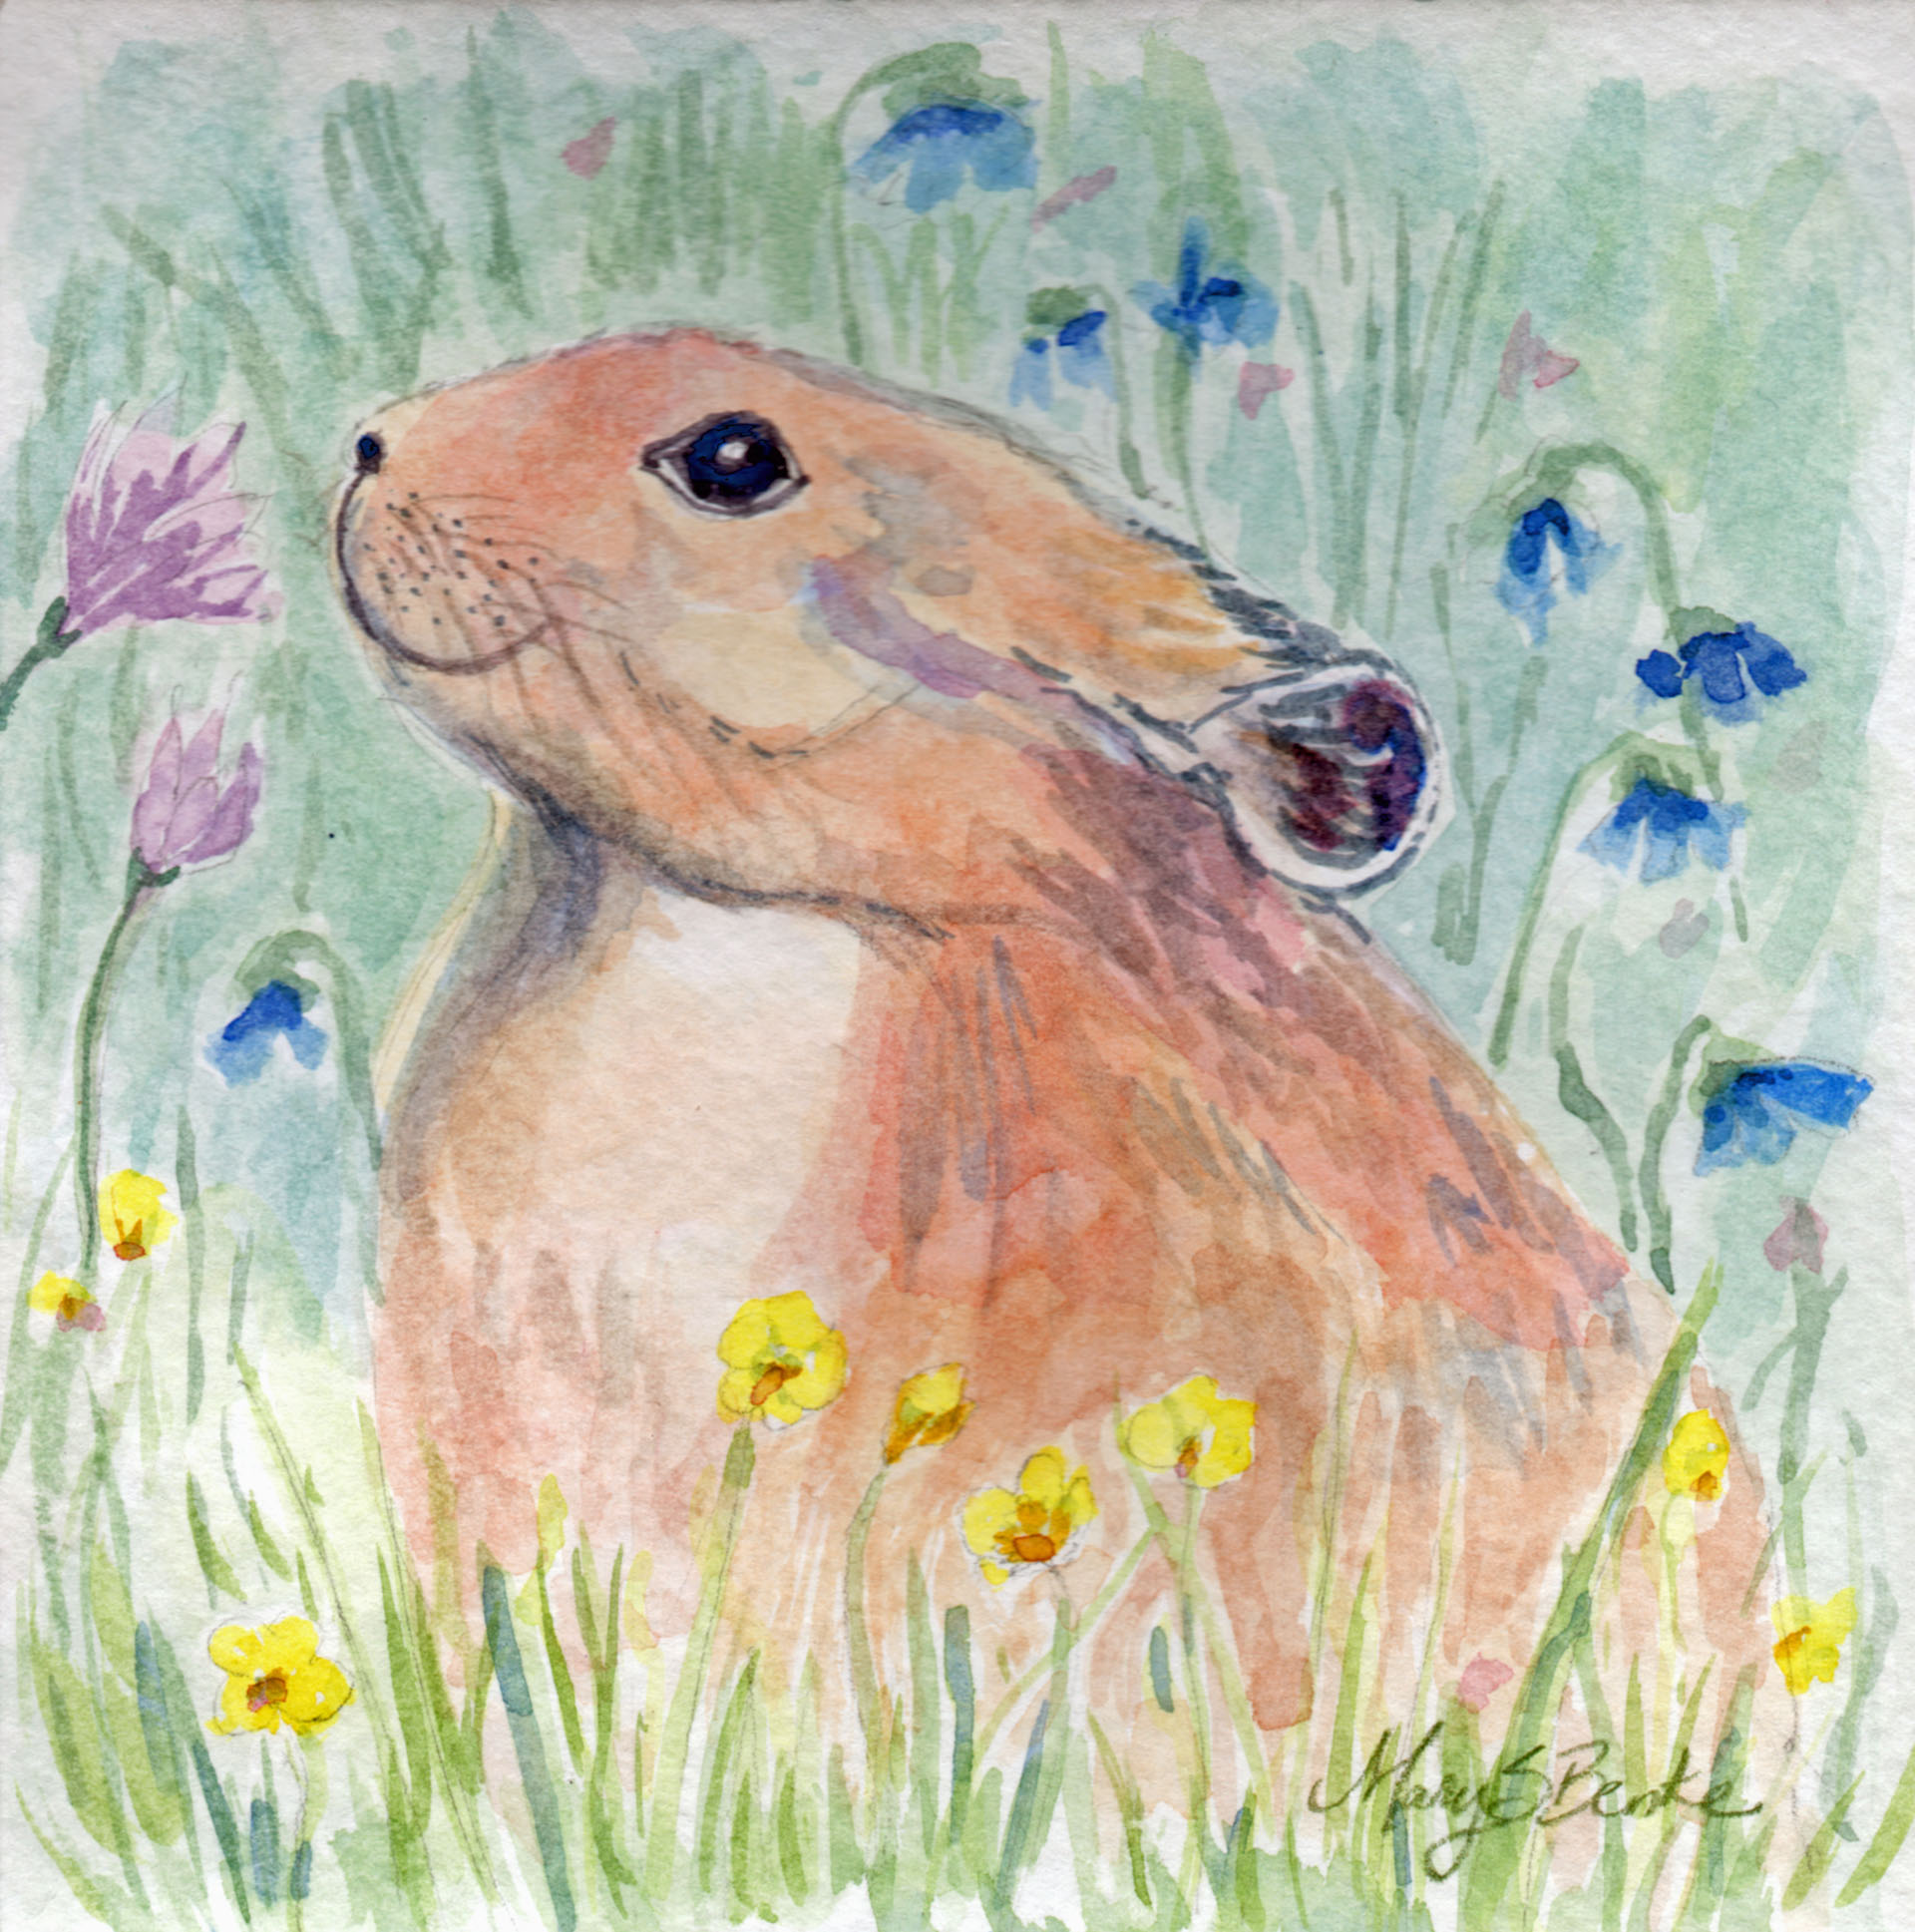 An adorable pika sits in a meadow of wildflowers in this square-format watercolor painting by Mary Benke